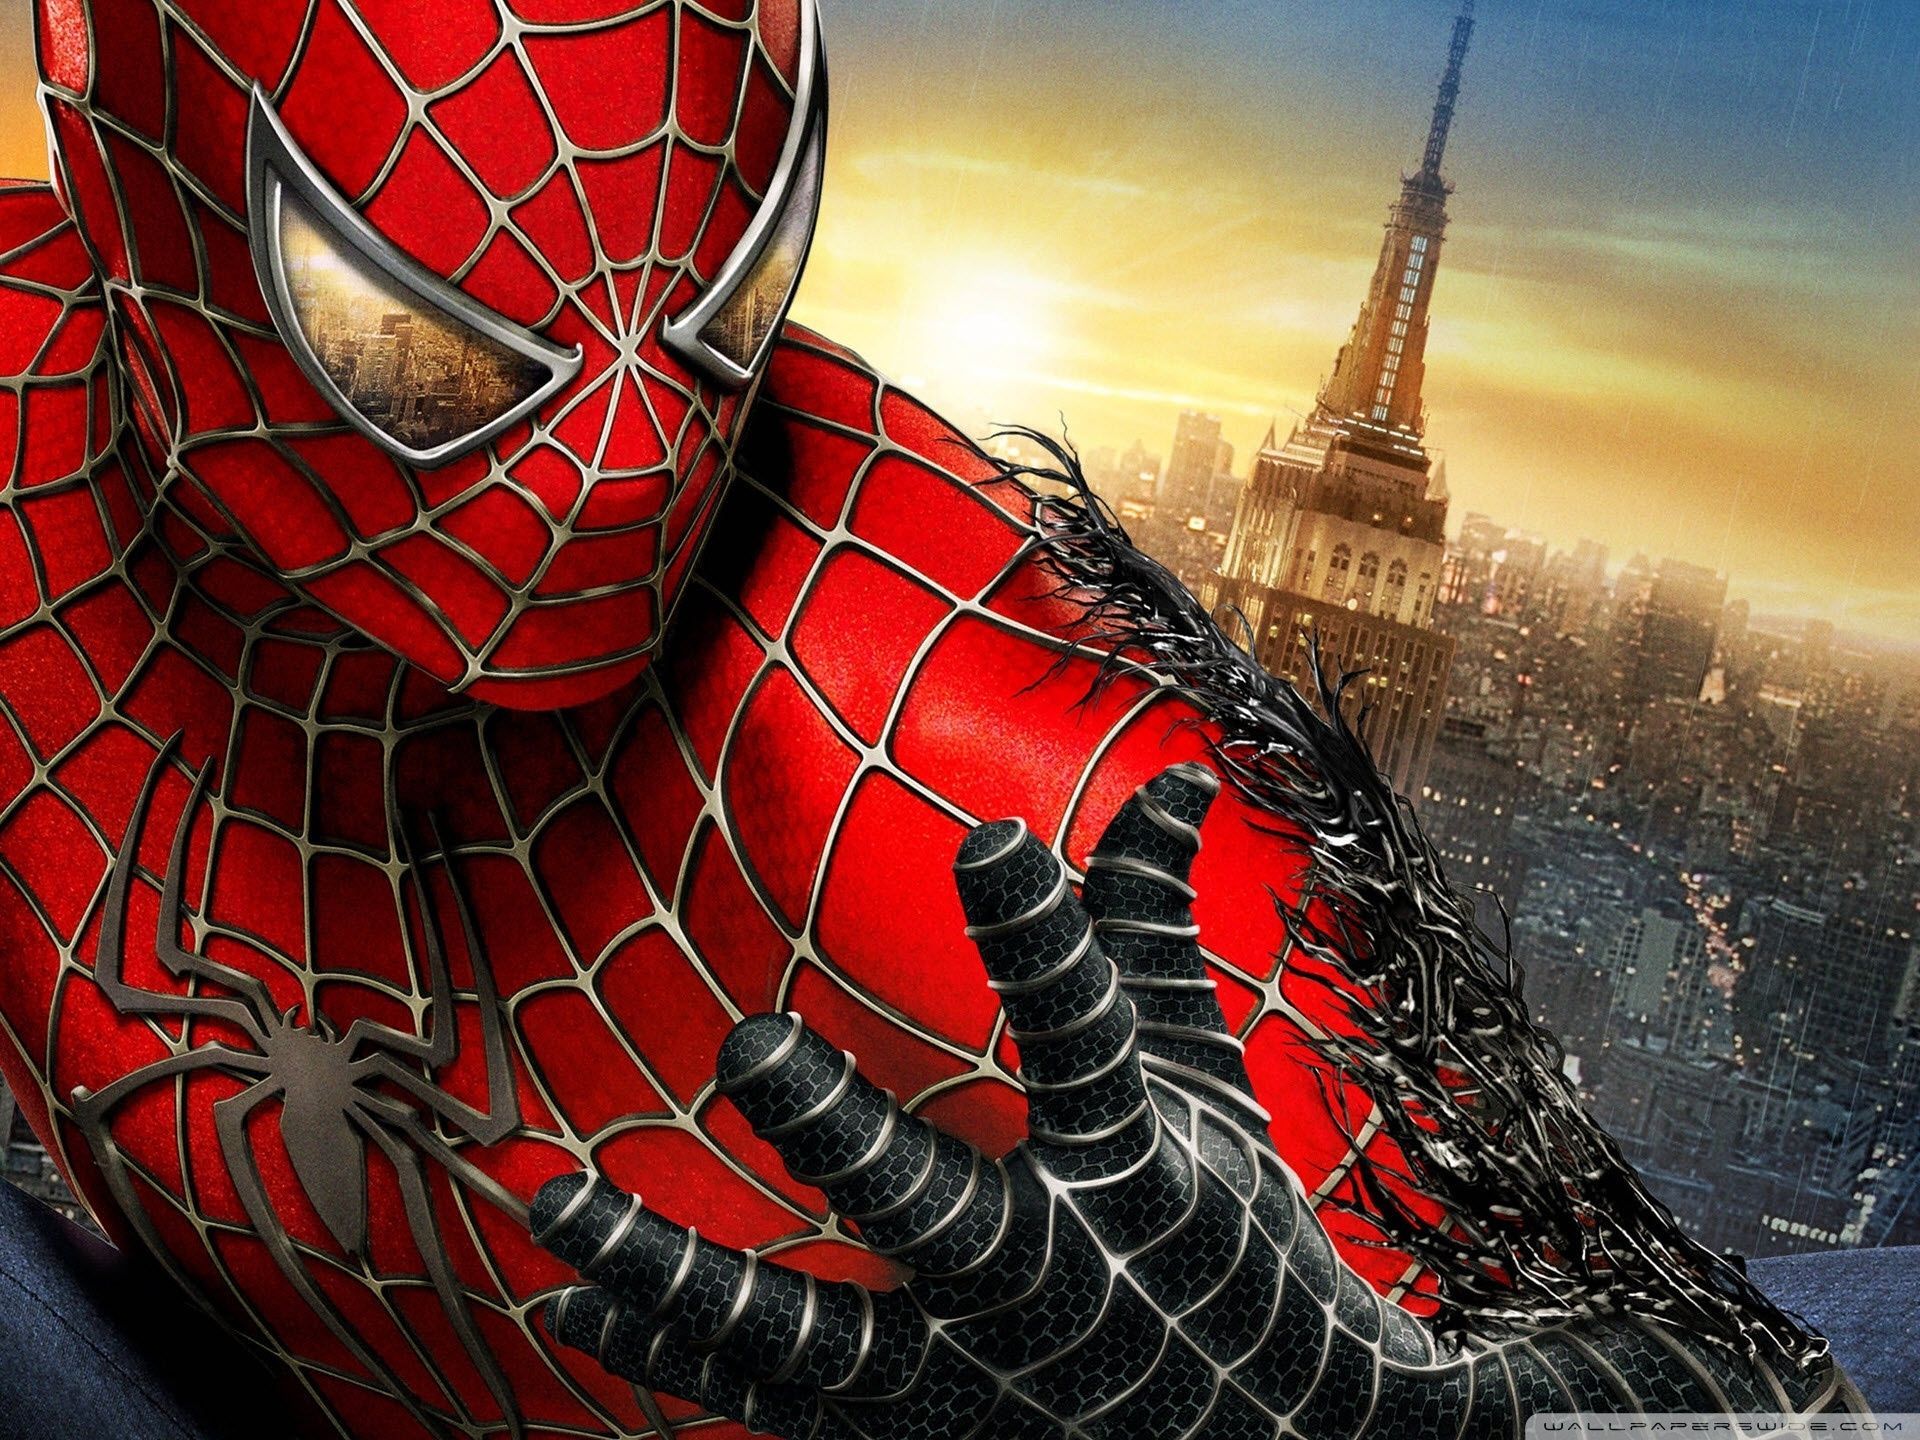 Best Spider Man Wallpaper HD FULL HD 1080p For PC Background. Spiderman, Man Wallpaper, Amazing Spiderman